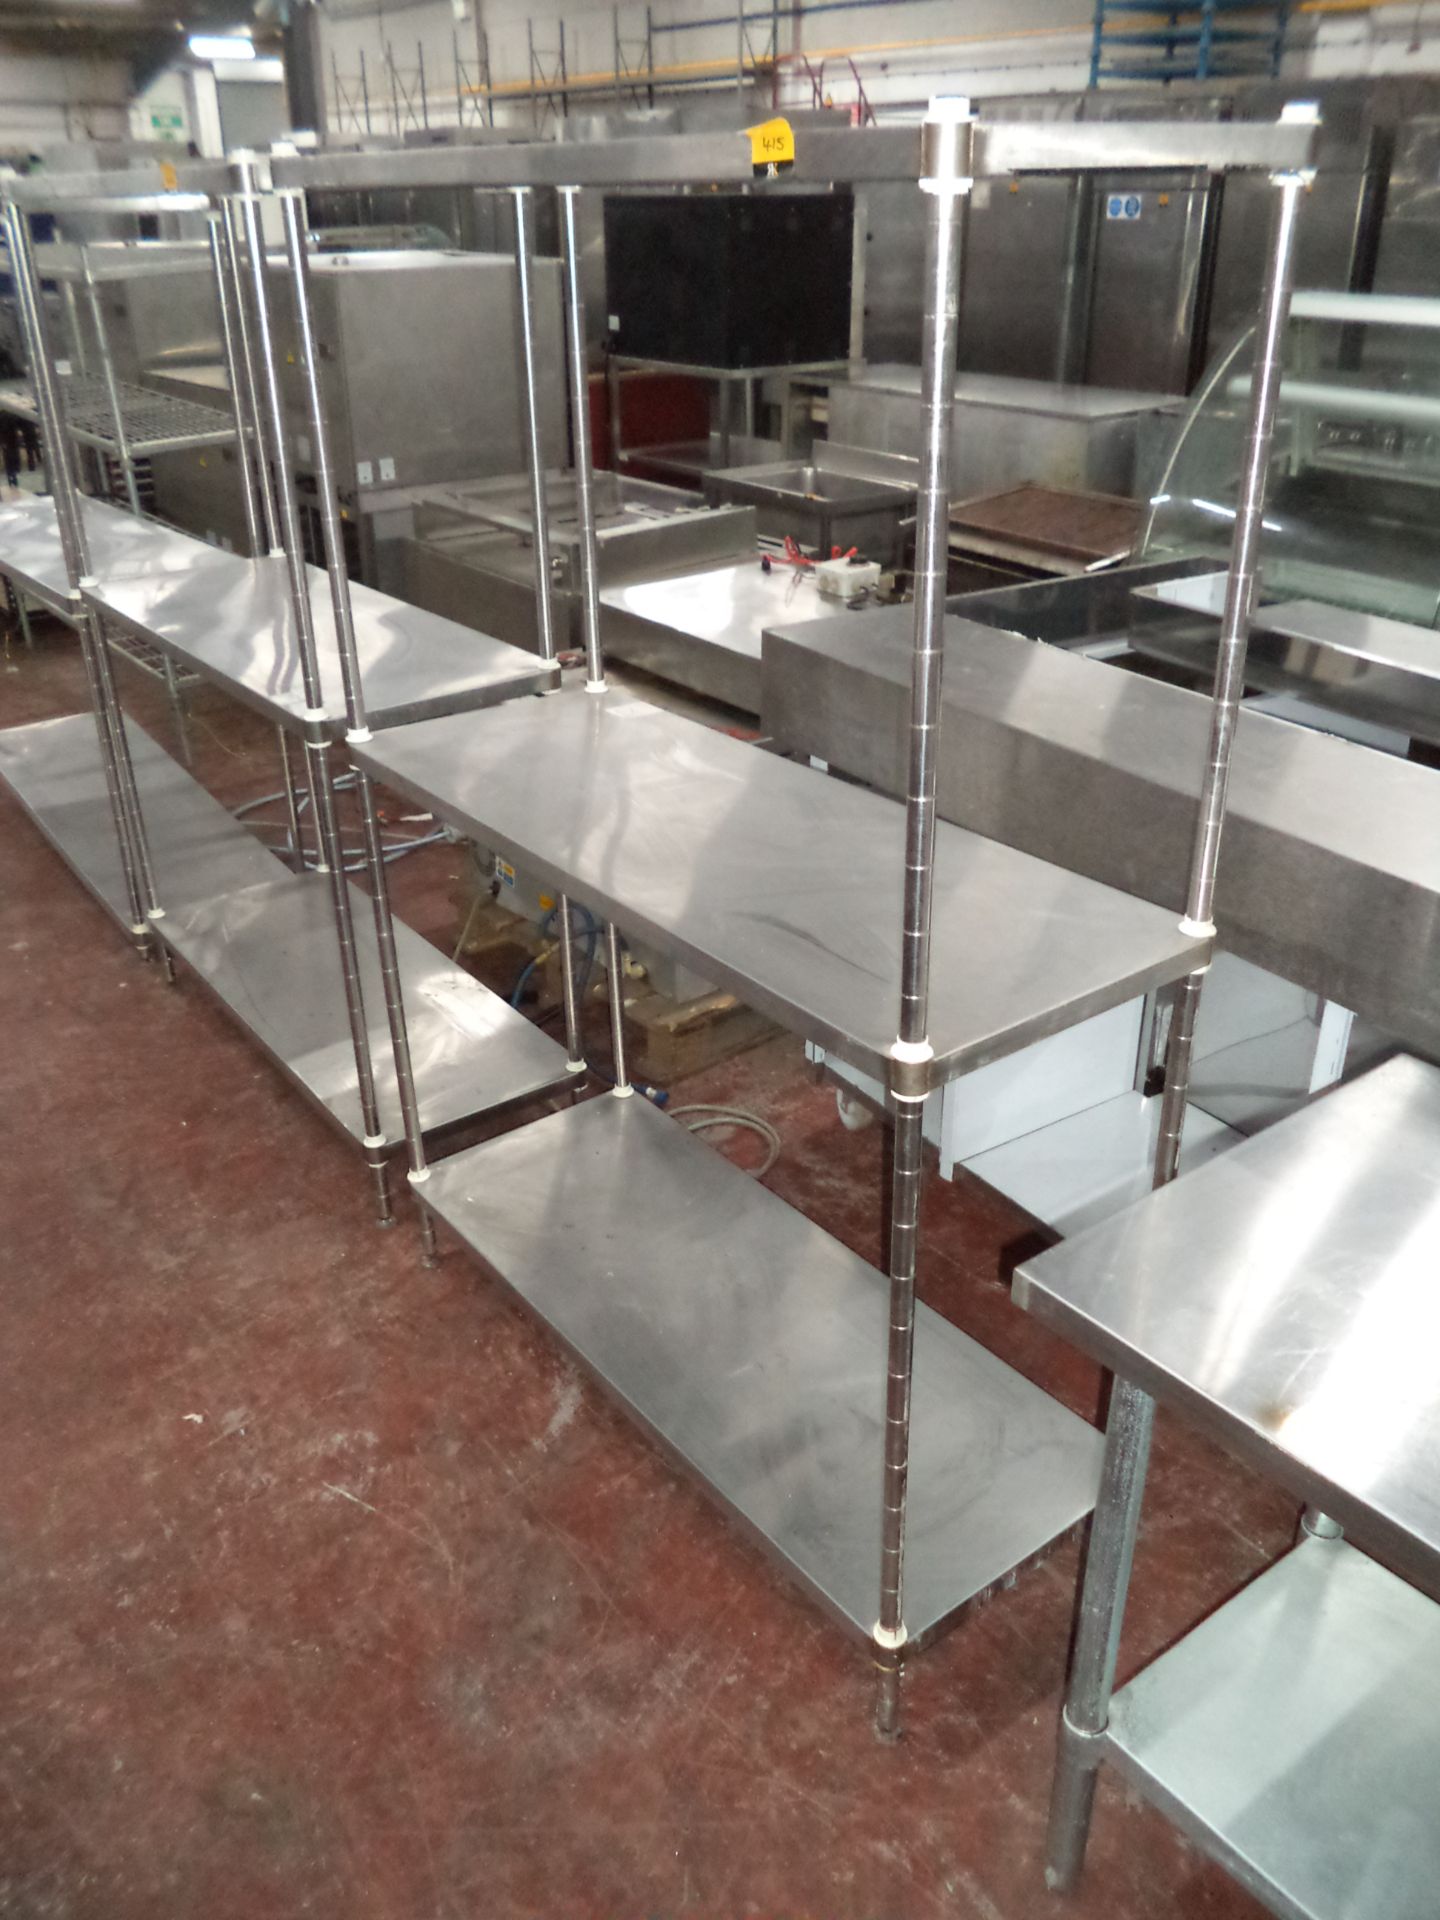 Stainless steel 3-level racking unit IMPORTANT: Please remember goods successfully bid upon must